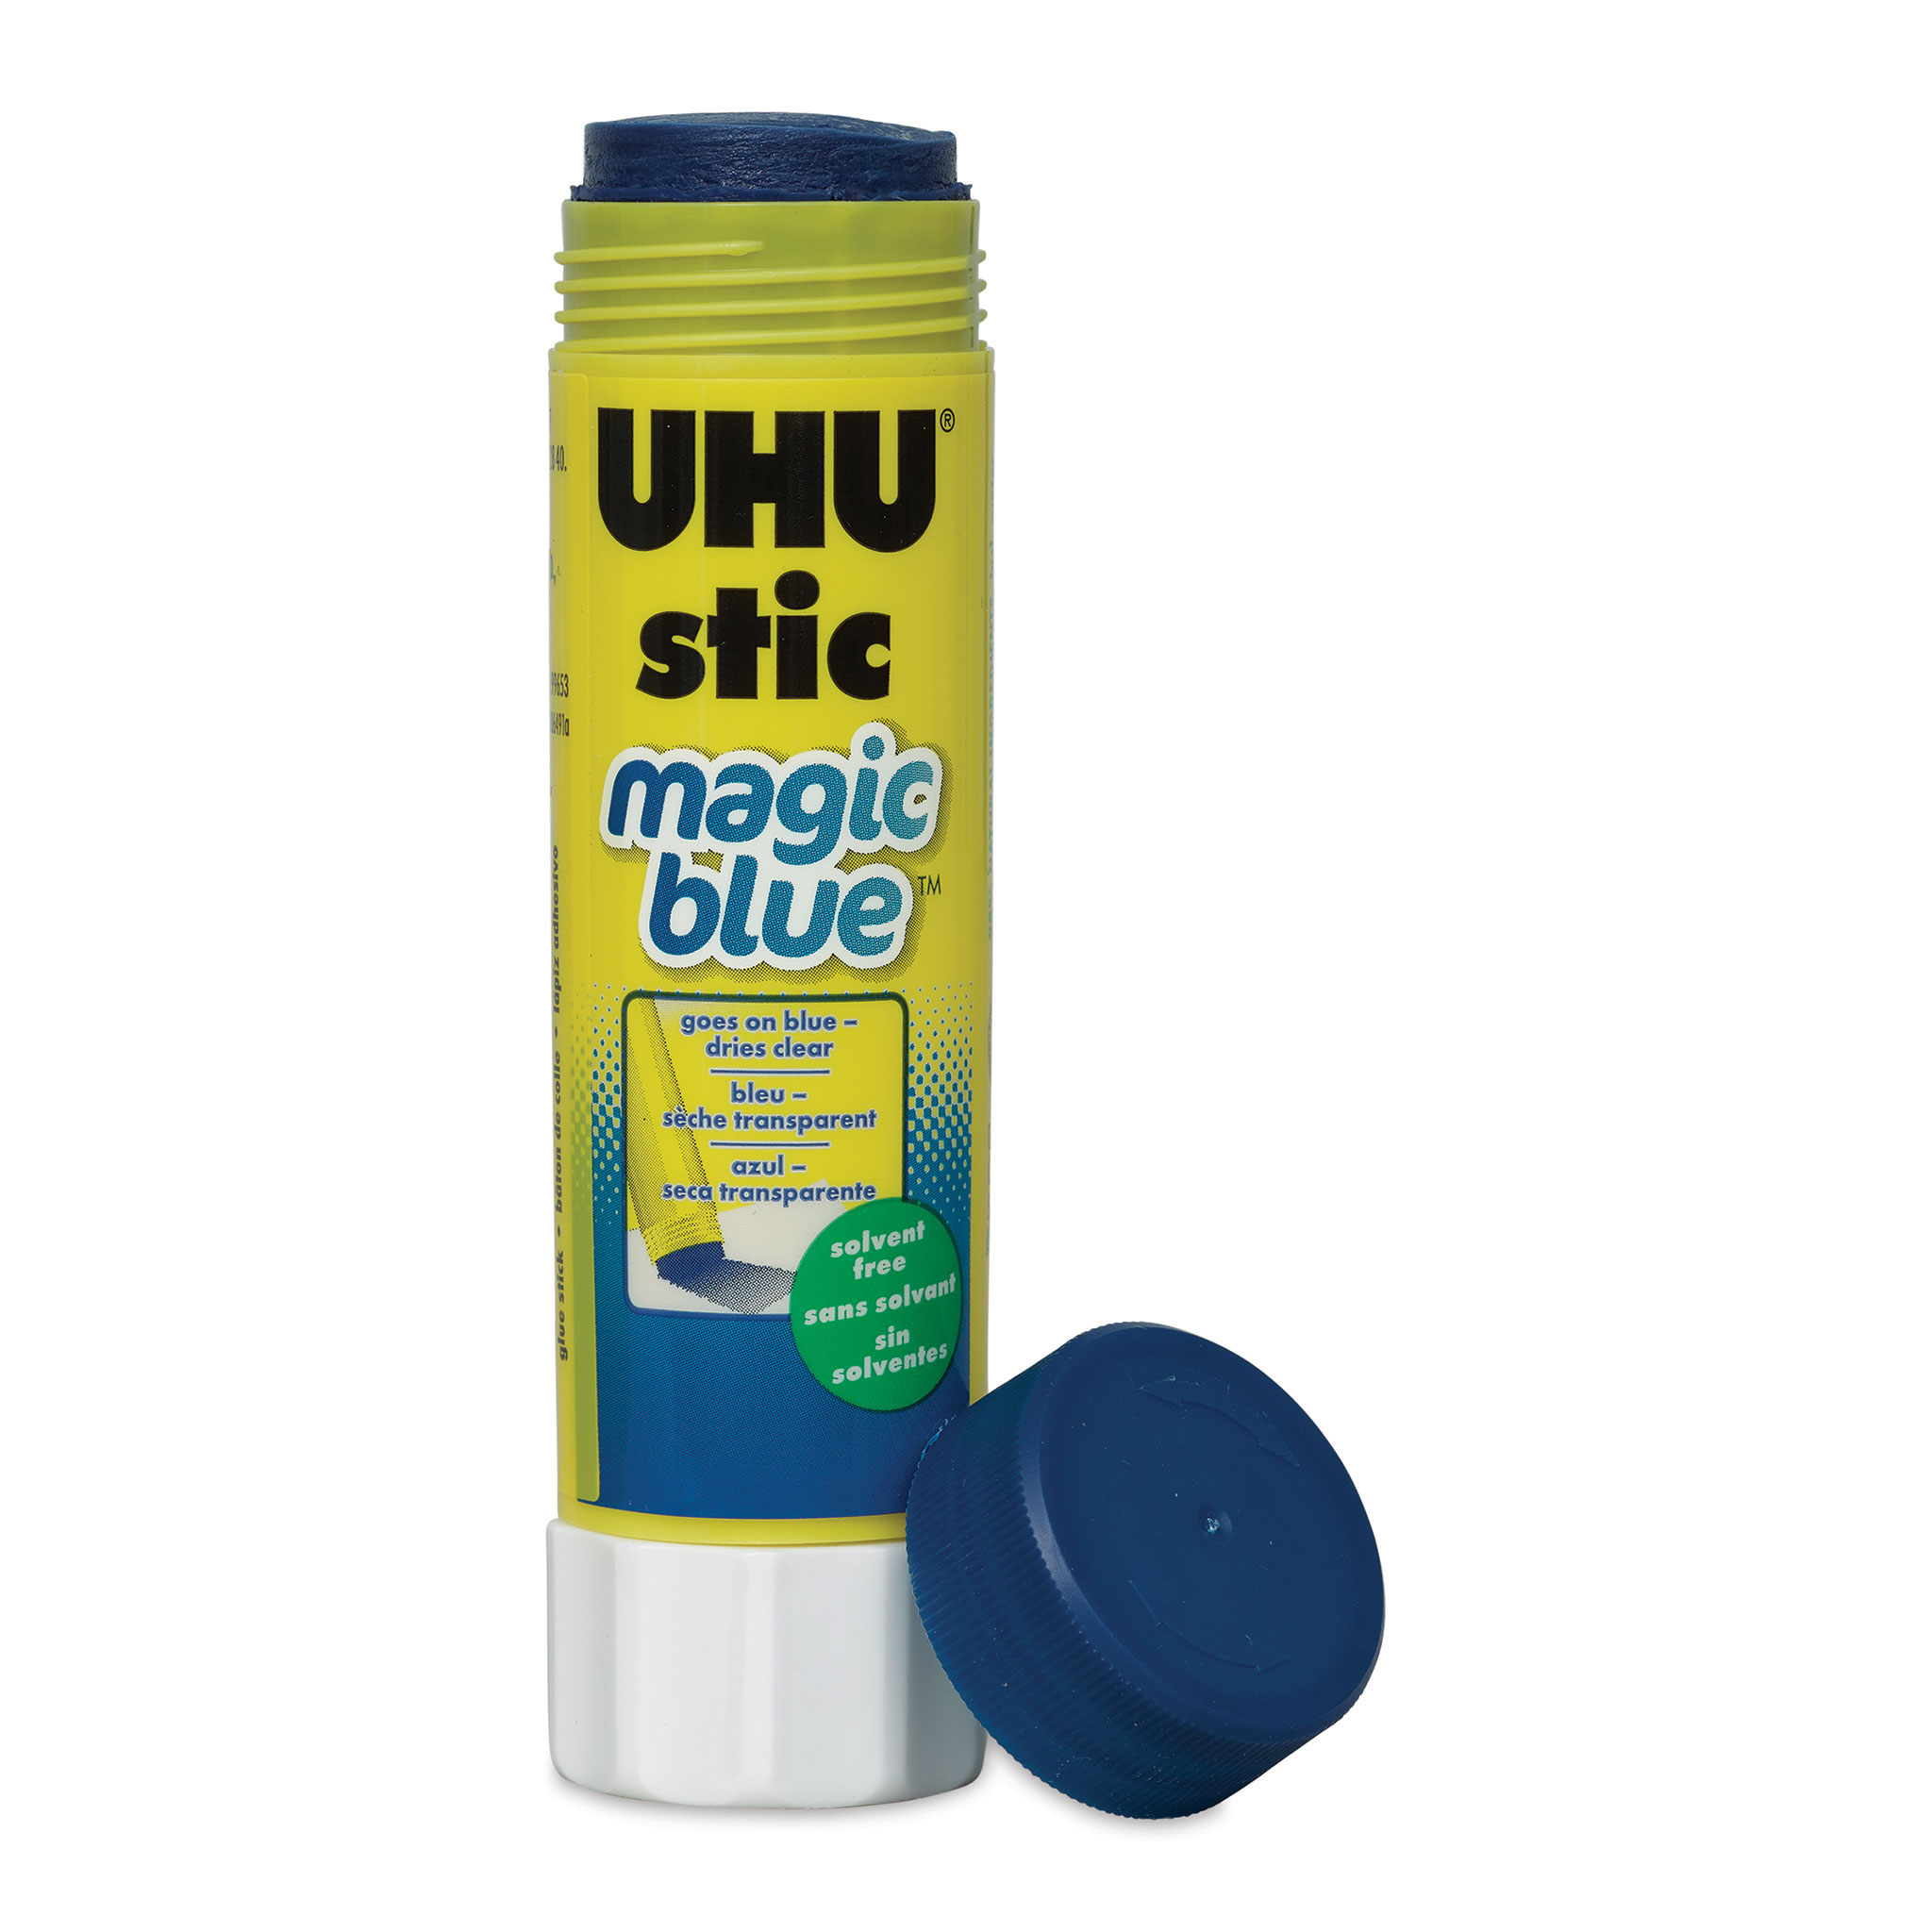 Brydens Xpress - UHU Glue Sticks Solvent free and non toxic. Spreads  easily, sticks immediately, dries clear and washes out with cold water.  Order Online: UHU Glue Stick Large   UHU  Glue